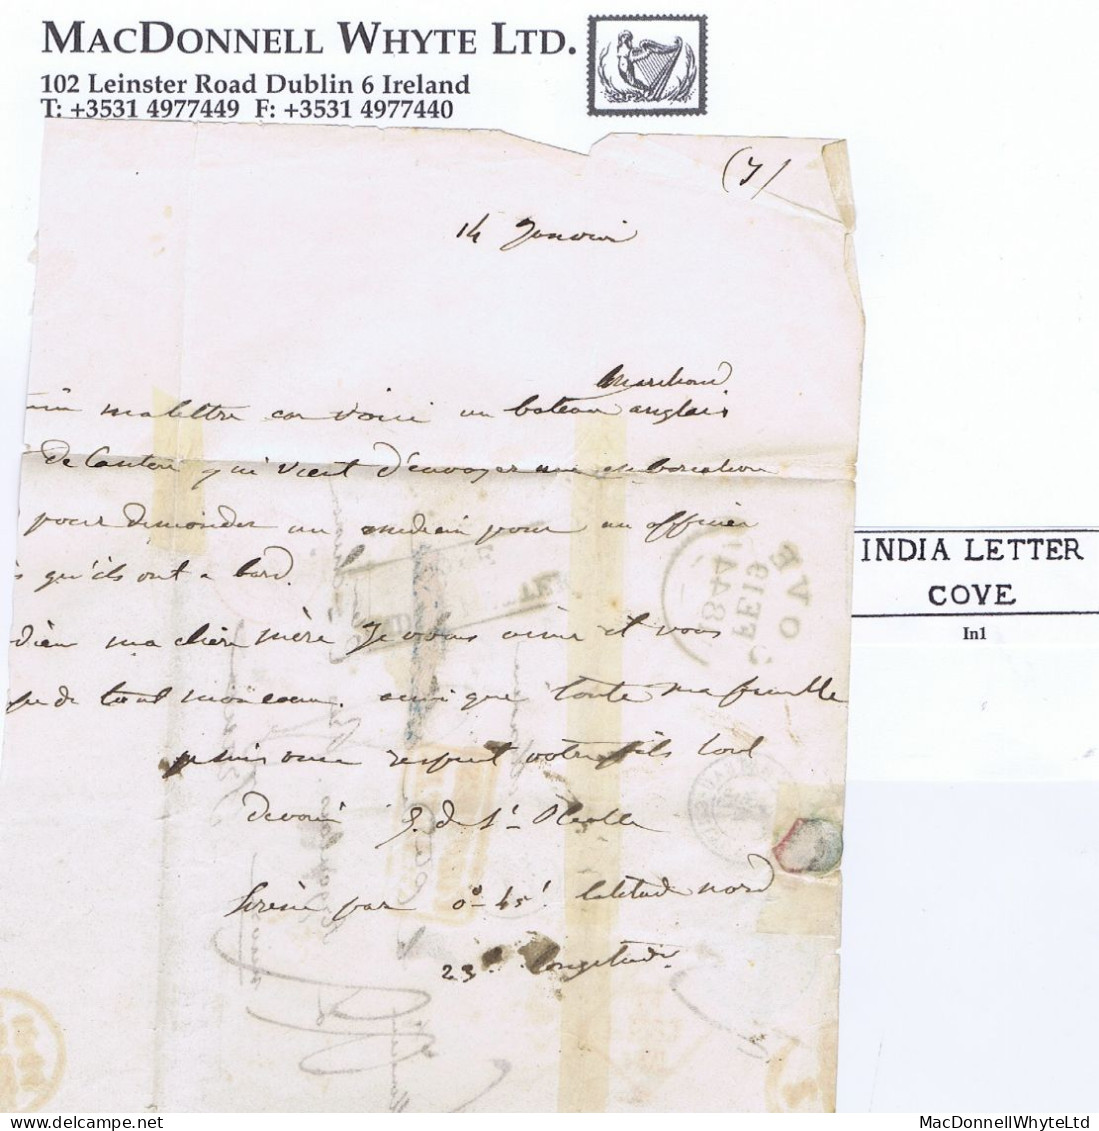 Ireland Maritime Cork 1844 Cover To France With Boxed INDIA LETTER/COVE And COVE FE 19 1844 Cds - Préphilatélie